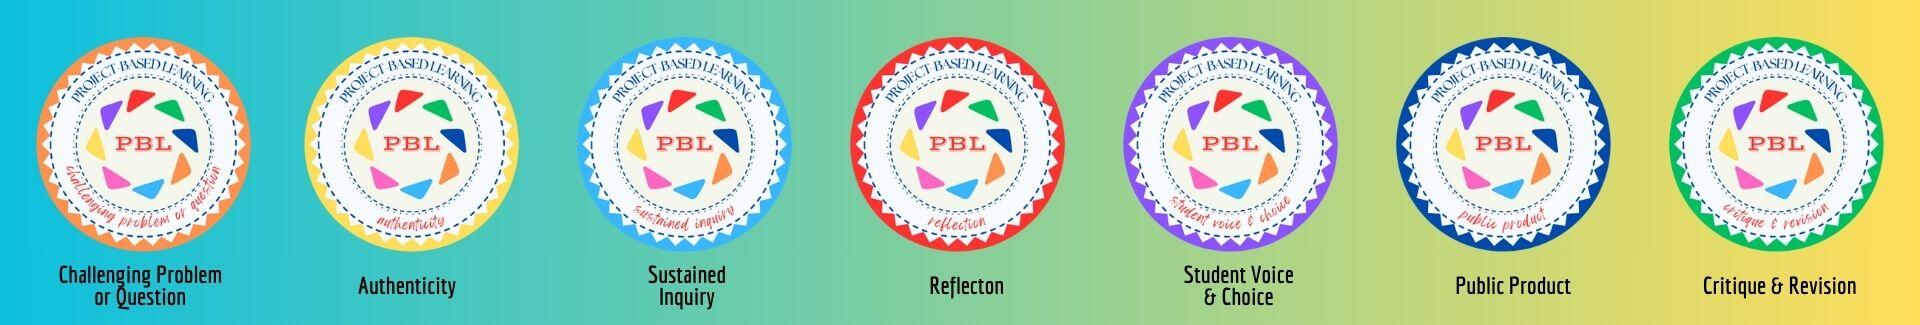 Essential Elements of PBL